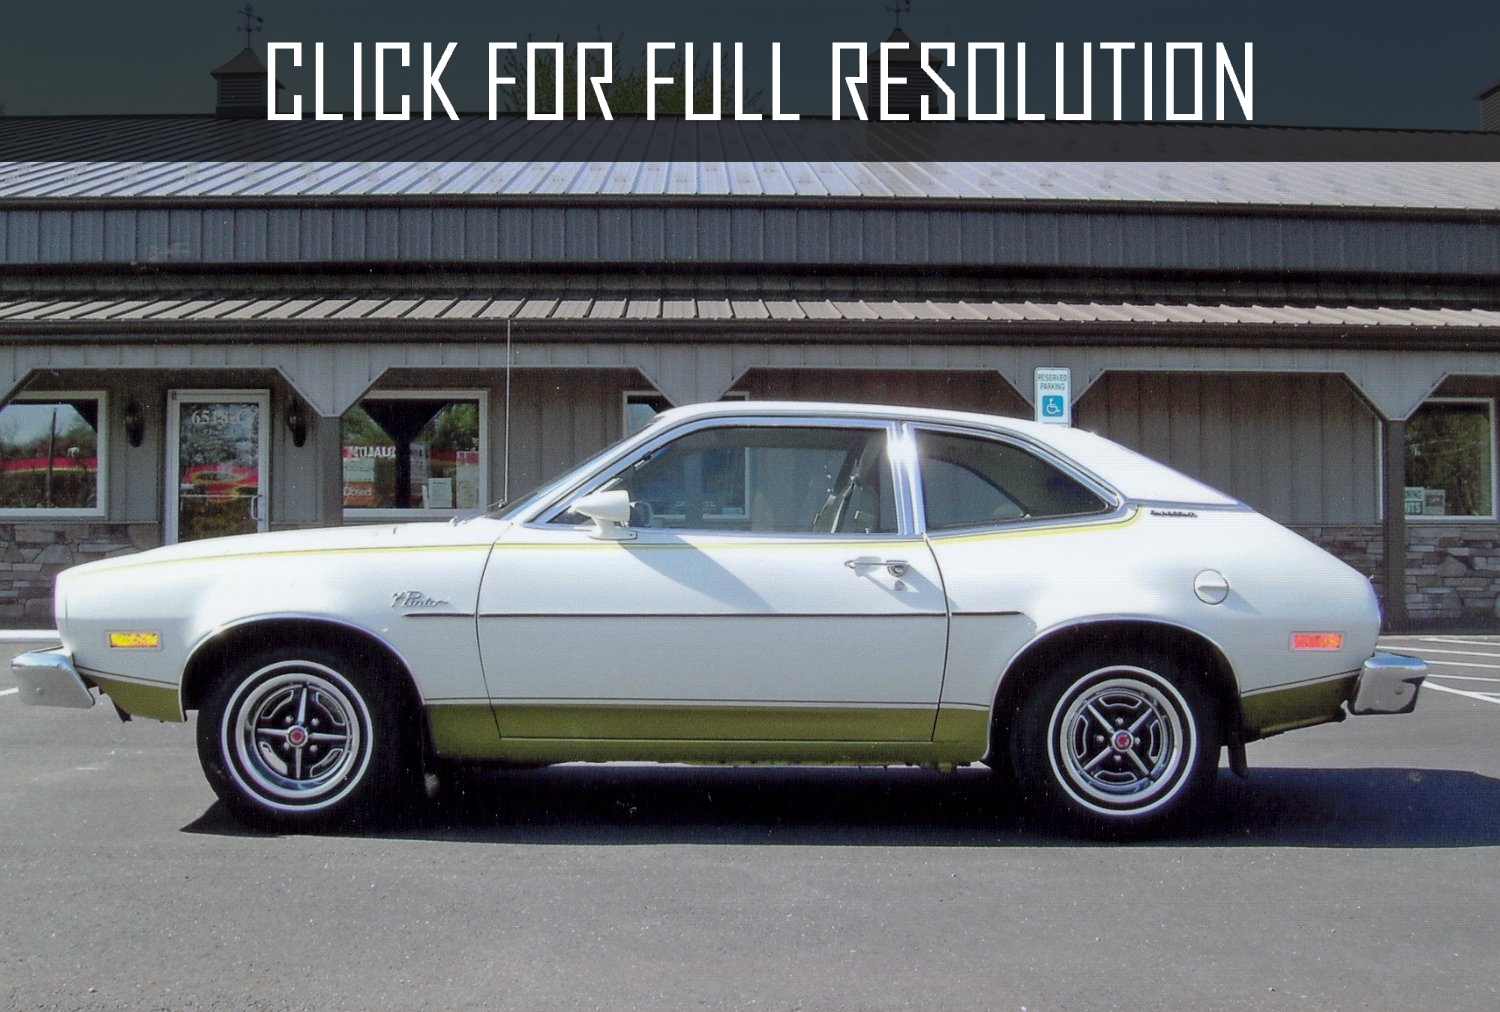 1974 Ford Pinto